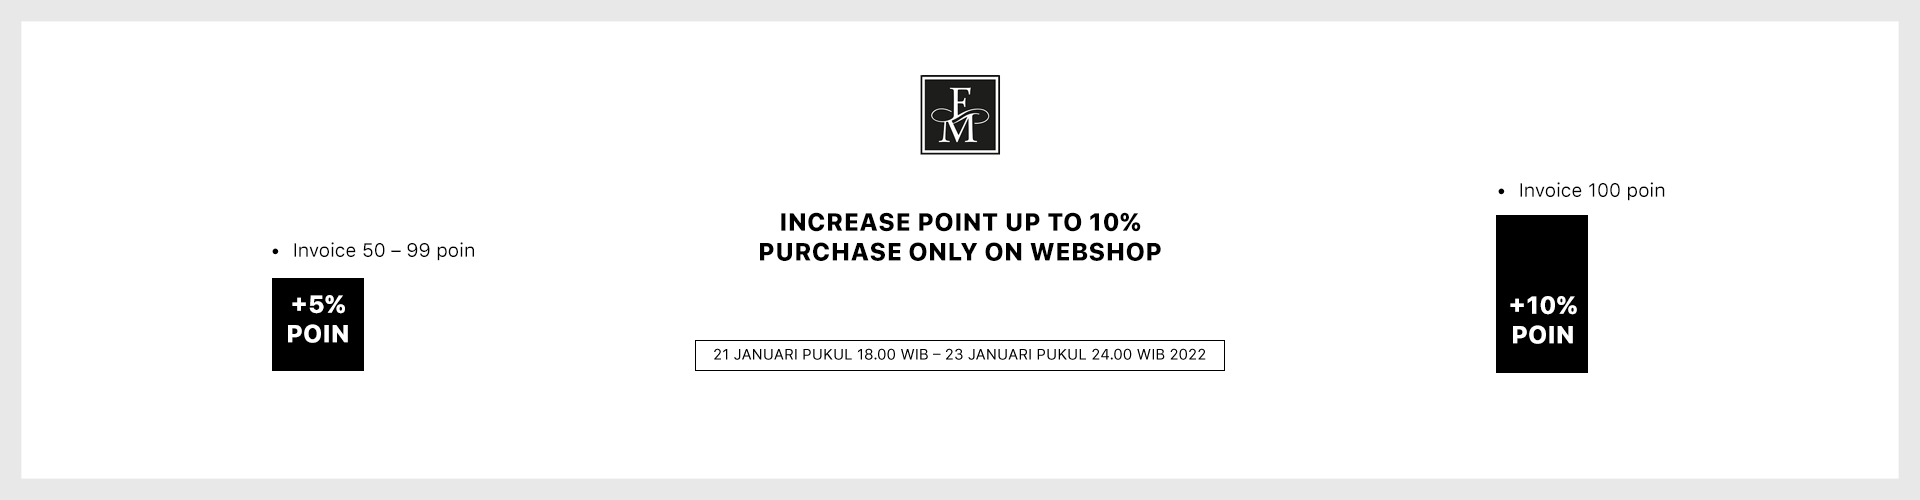 INCREASE POINT UP TO 10% PURCHASE ONLY ON WEBSHOP